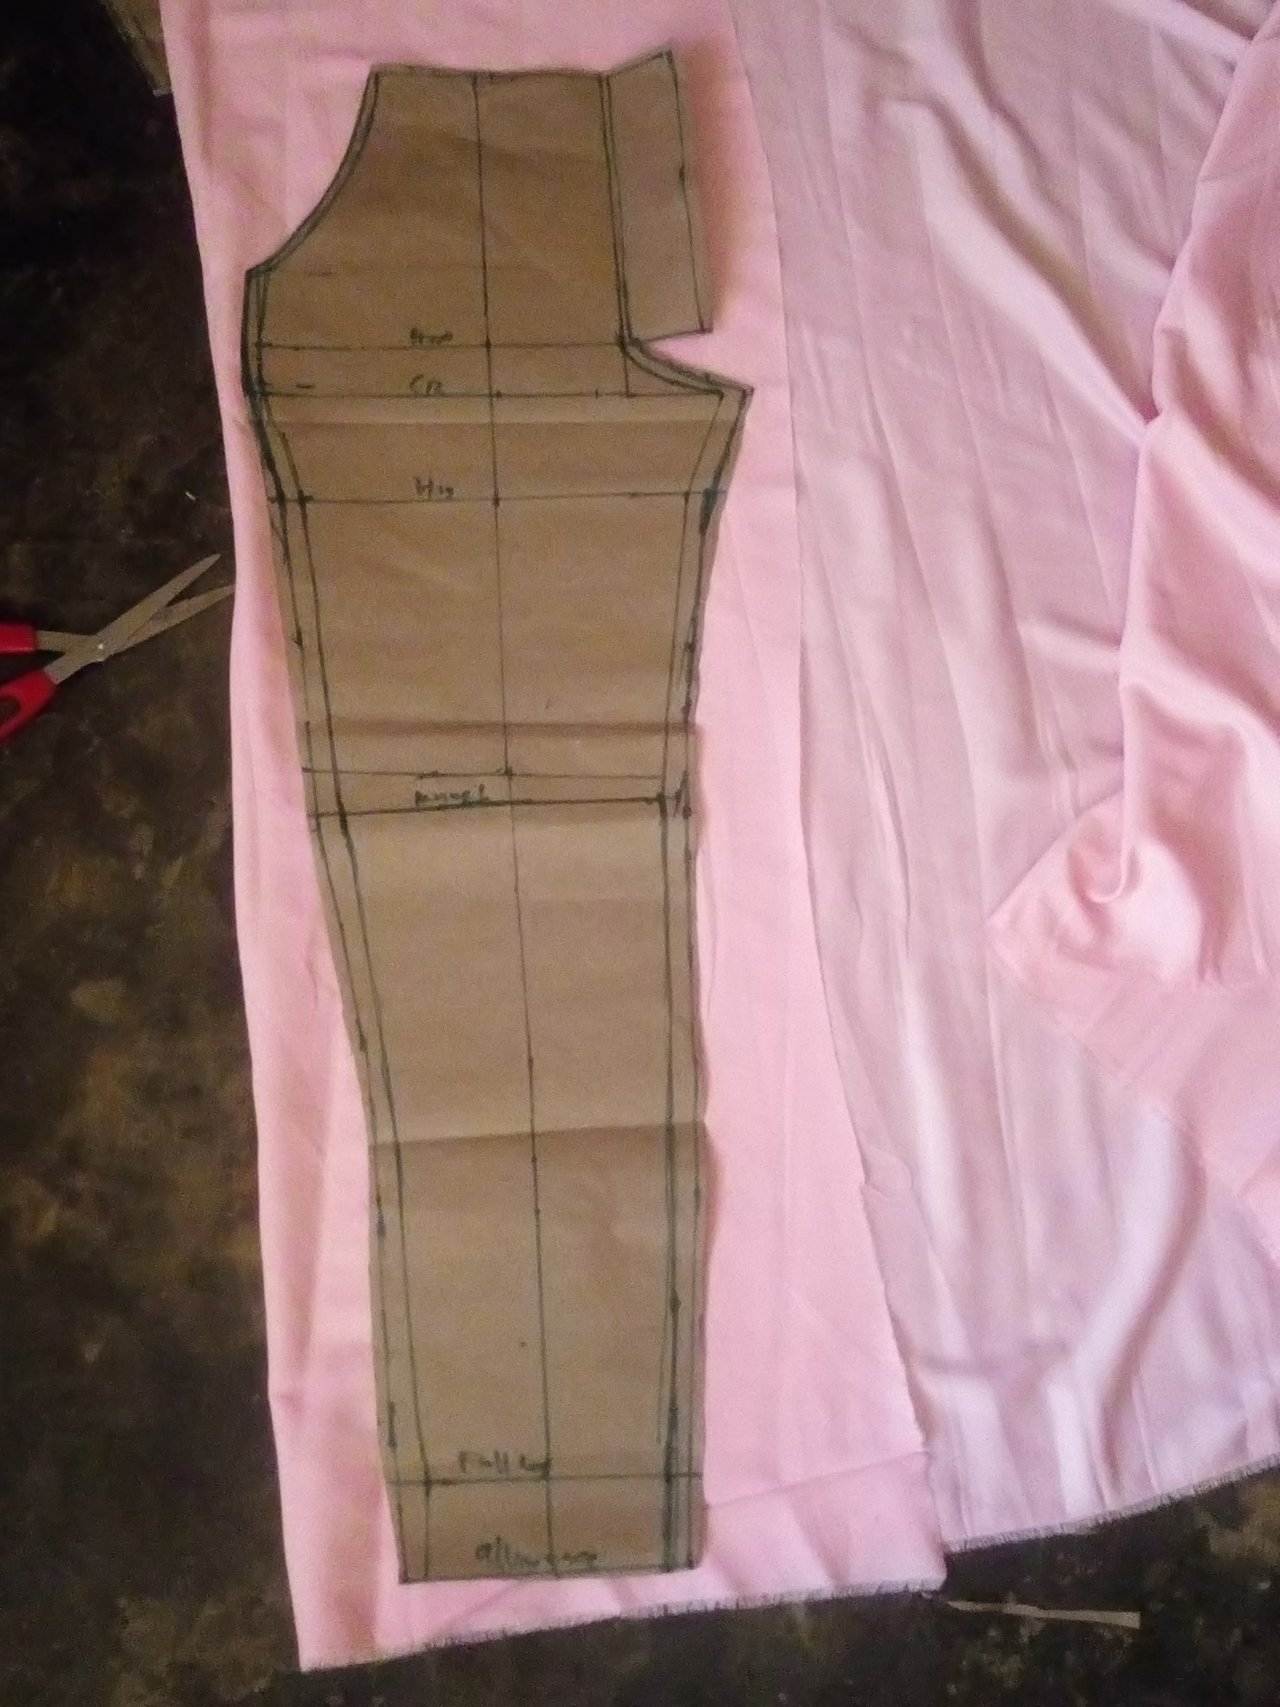 Fabric saloon  pattern for plazo pant cutting  Facebook